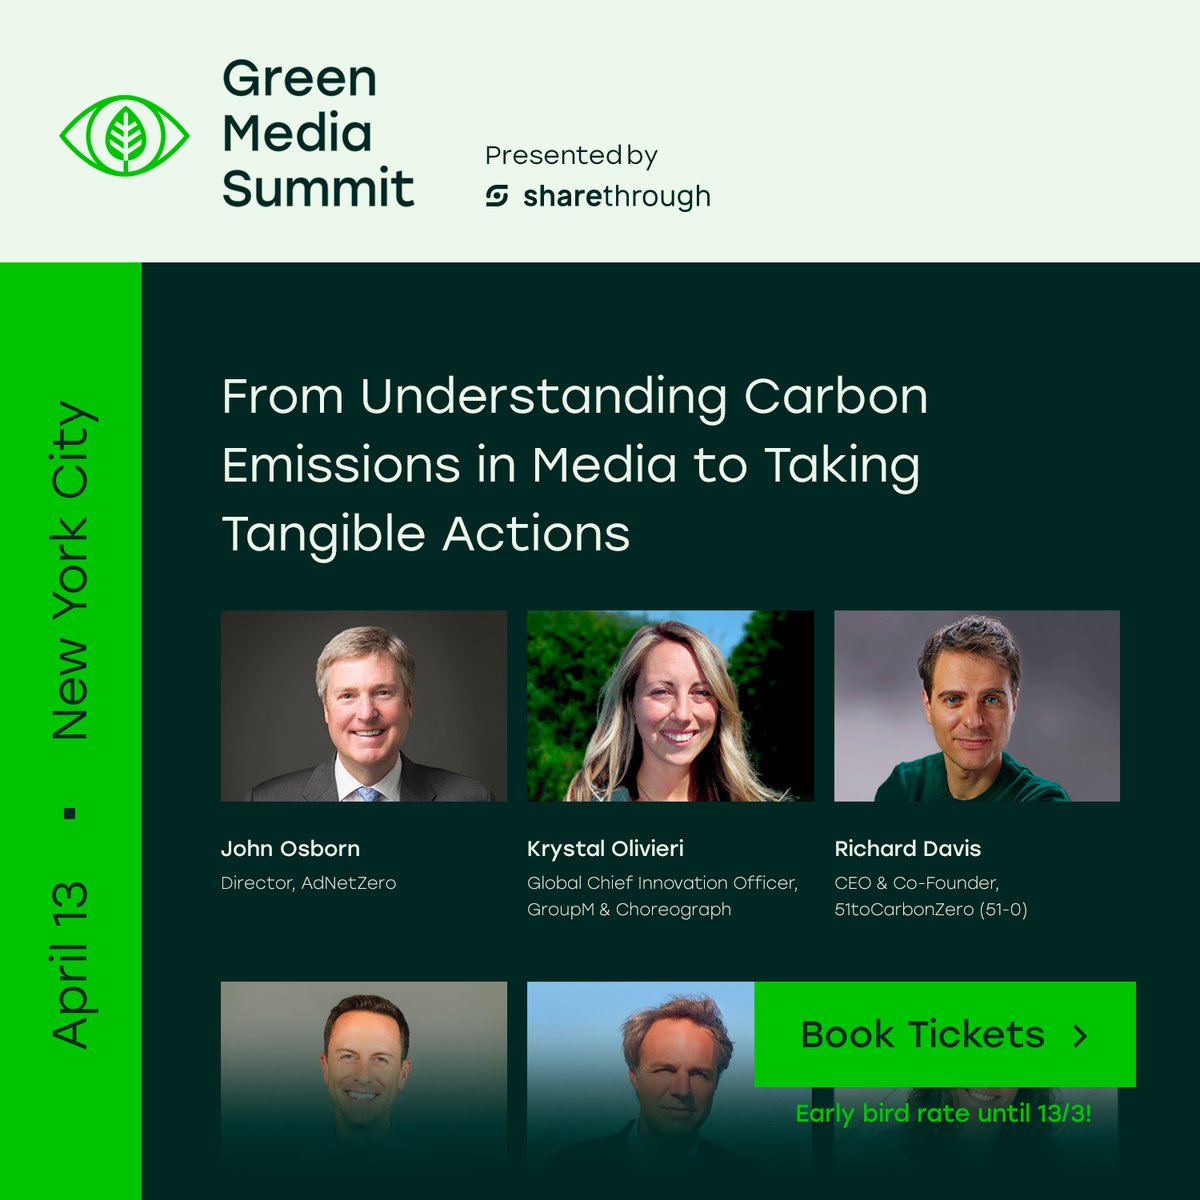 The Green Media Summit Thursday, April 13 in New York City. Hear from an extensive list of industry experts including John Osborn, Krystal Olivieri, Brian O'Kelley, and Richard Davis!

✨ Stay tuned as we announce new speakers every week.

👉 greenmediasummit.com

#greenmedia